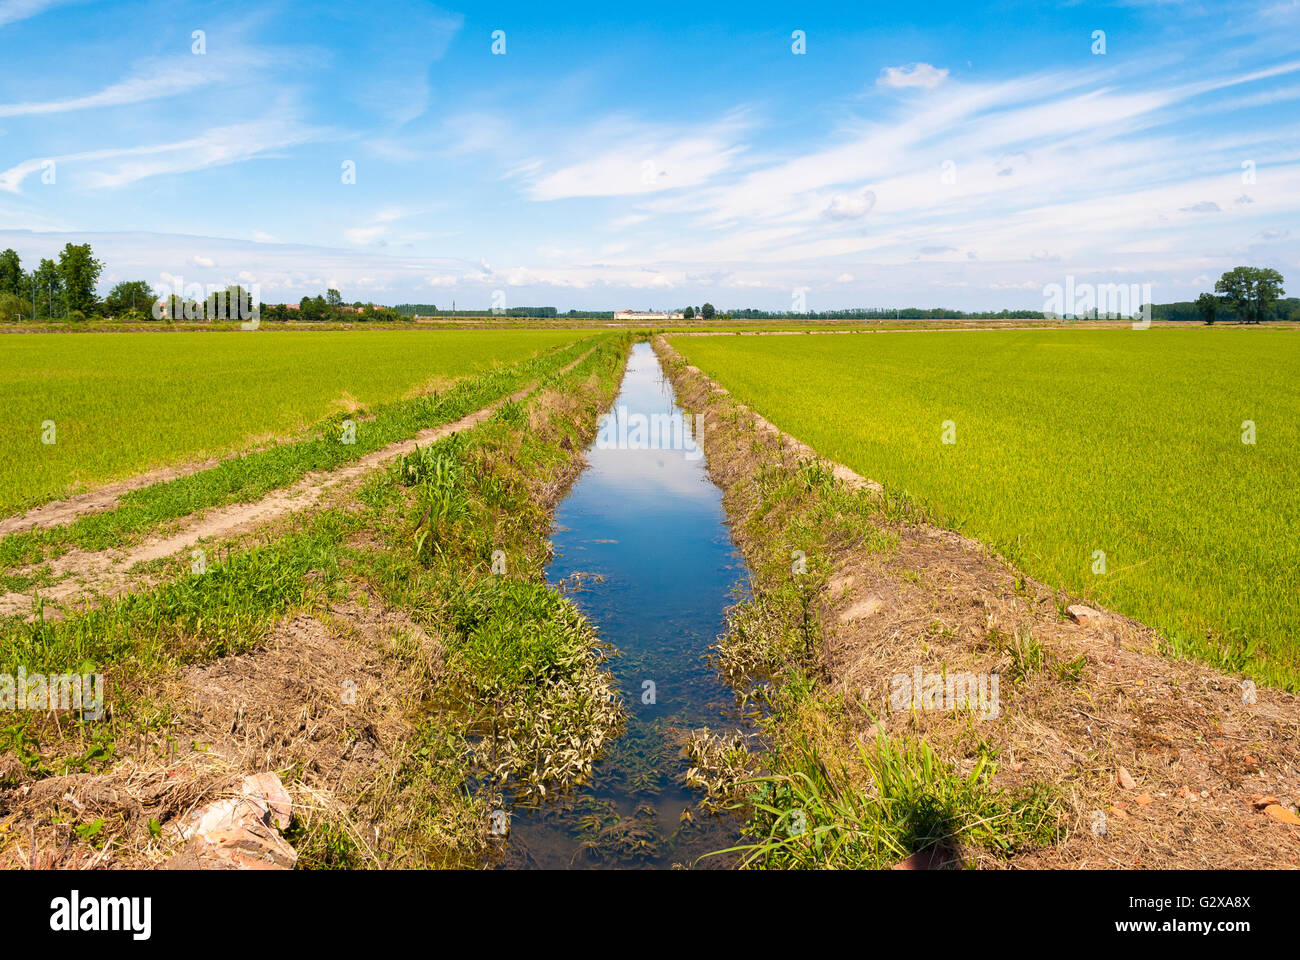 Canal for the irrigation of cultivated fields Stock Photo